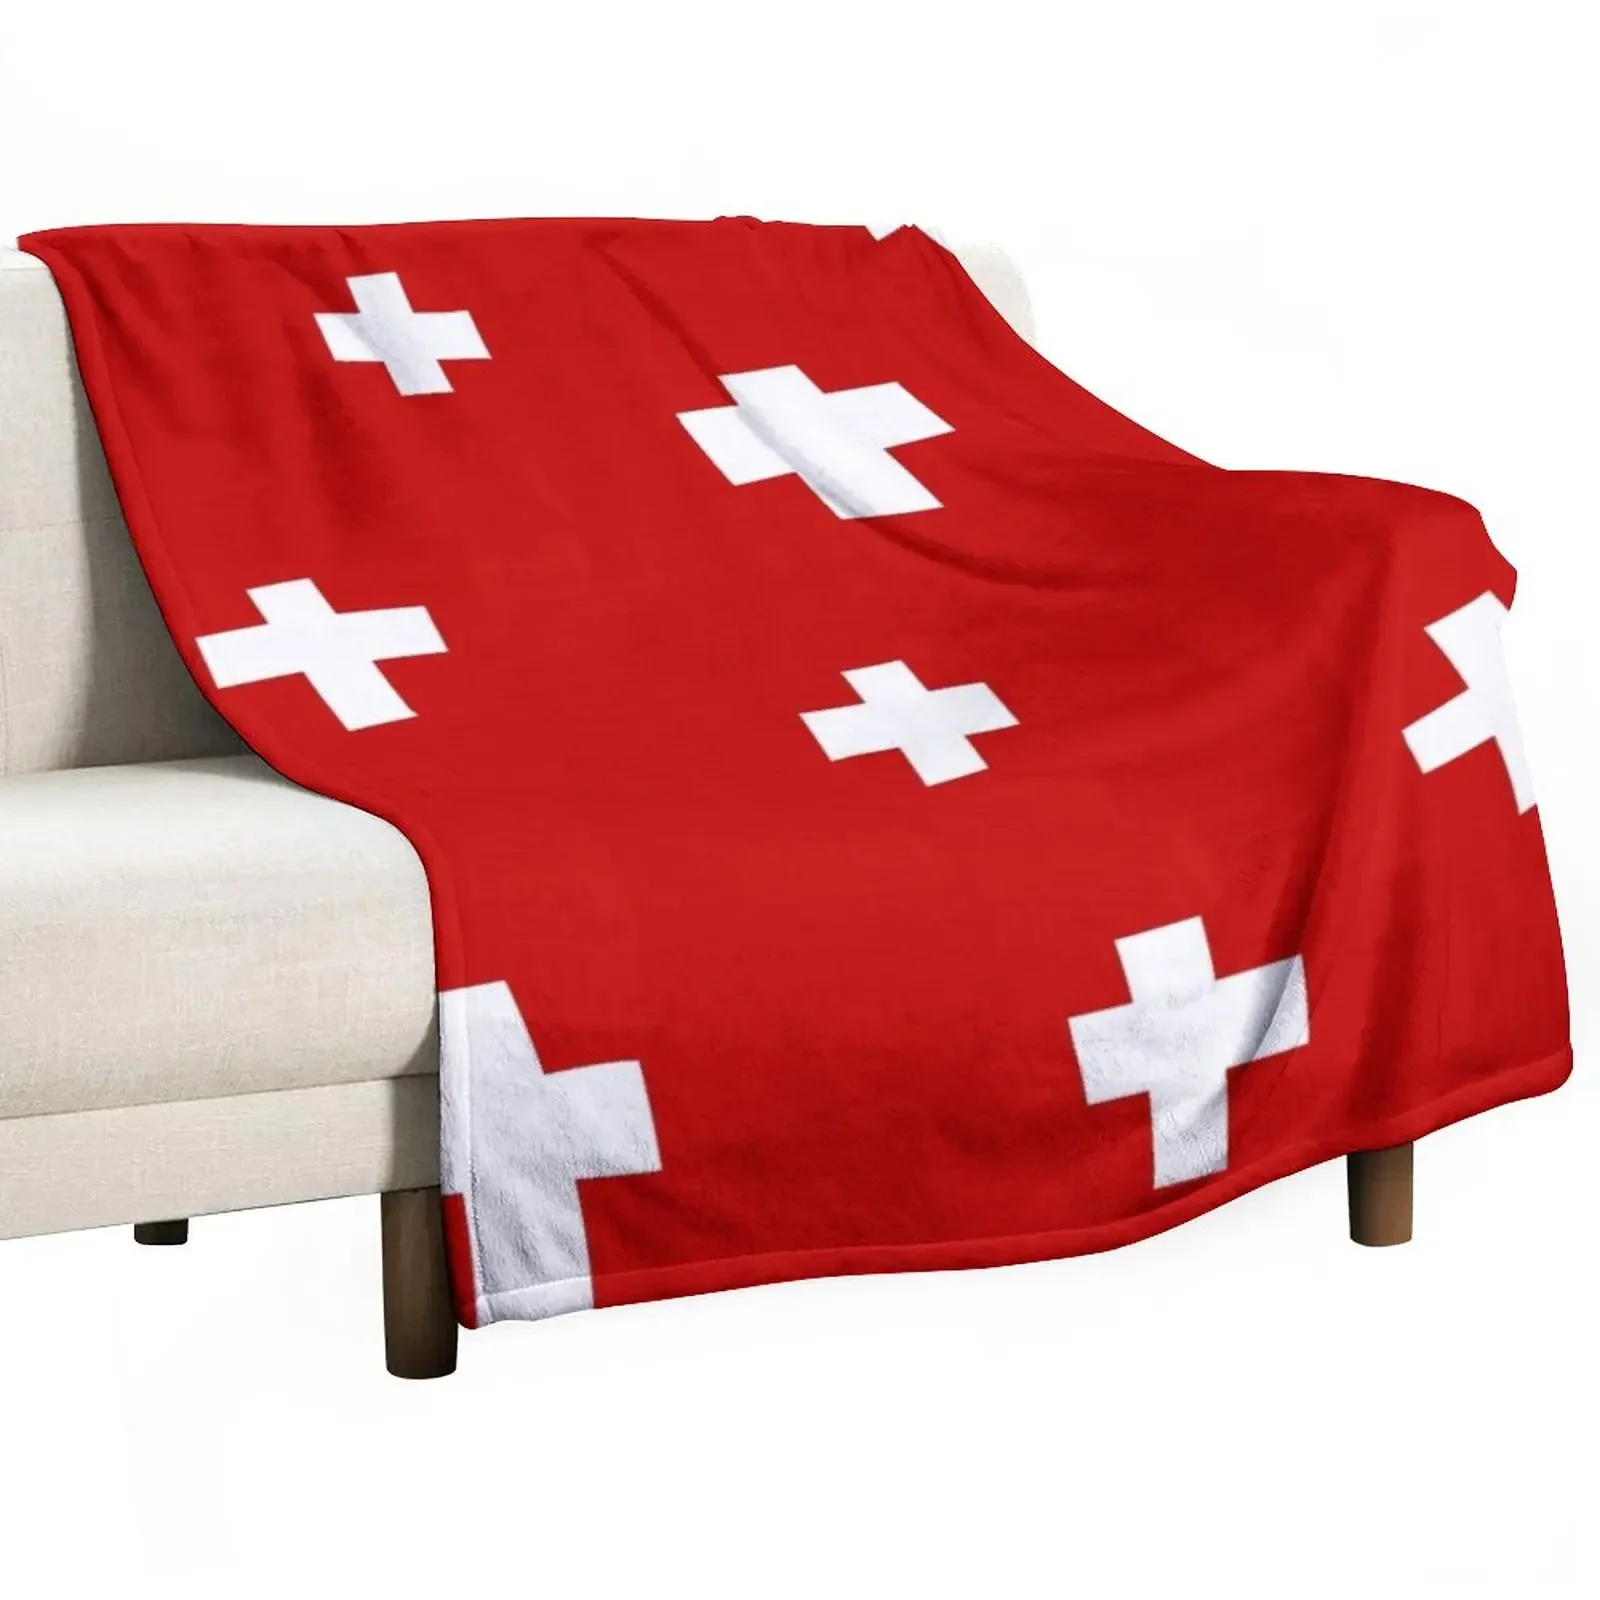 

Swiss flag Throw Blanket Fluffys Large Thins warm for winter Decorative Beds Blankets